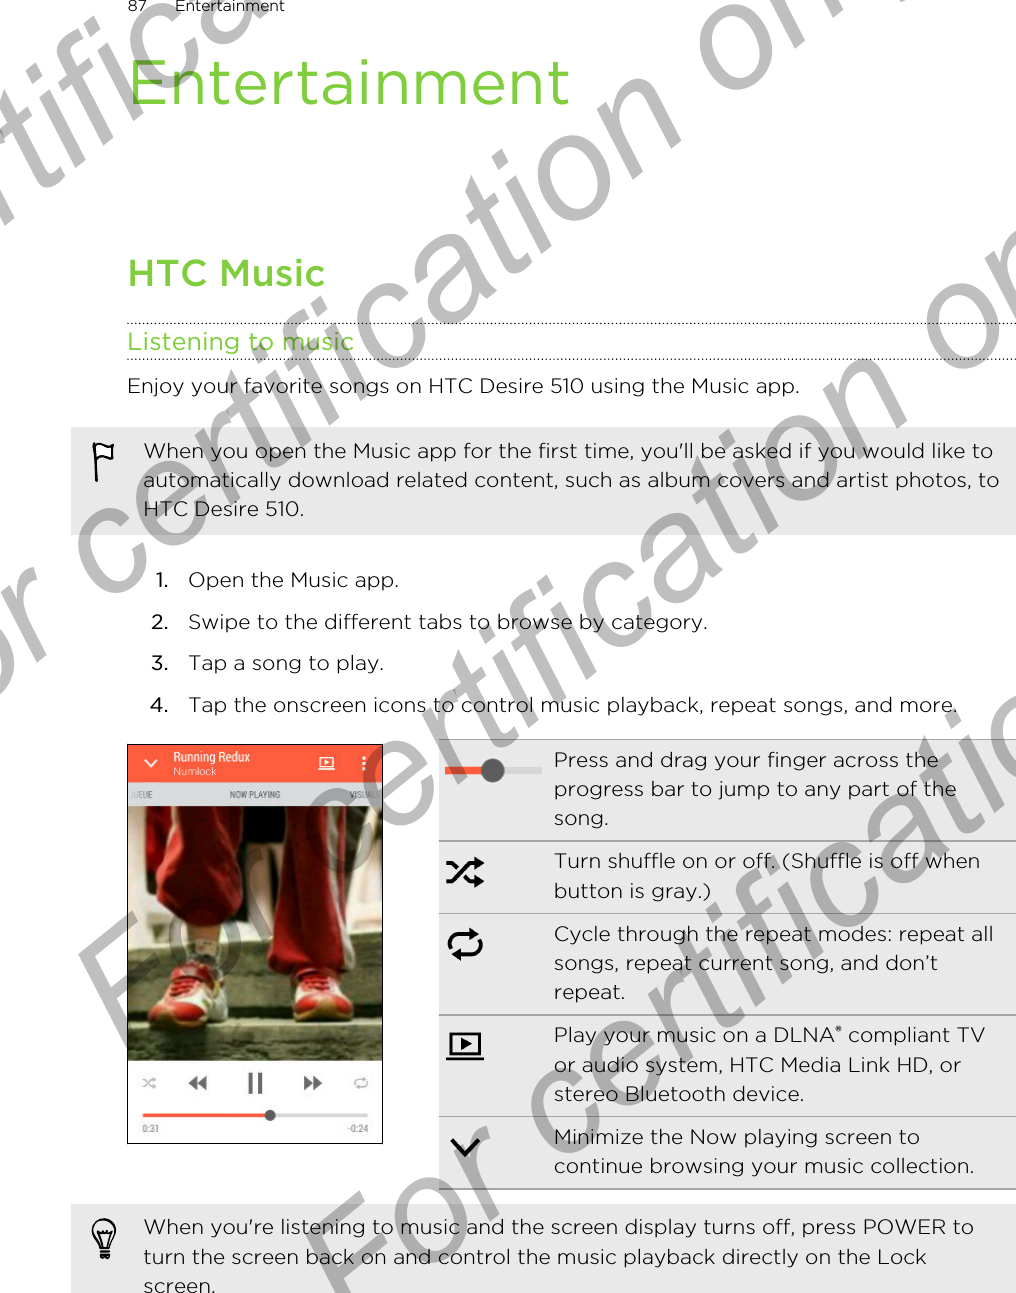 EntertainmentHTC MusicListening to musicEnjoy your favorite songs on HTC Desire 510 using the Music app.When you open the Music app for the first time, you&apos;ll be asked if you would like toautomatically download related content, such as album covers and artist photos, toHTC Desire 510.1. Open the Music app.2. Swipe to the different tabs to browse by category.3. Tap a song to play.4. Tap the onscreen icons to control music playback, repeat songs, and more.Press and drag your finger across theprogress bar to jump to any part of thesong.Turn shuffle on or off. (Shuffle is off whenbutton is gray.)Cycle through the repeat modes: repeat allsongs, repeat current song, and don’trepeat.Play your music on a DLNA® compliant TVor audio system, HTC Media Link HD, orstereo Bluetooth device.Minimize the Now playing screen tocontinue browsing your music collection.When you&apos;re listening to music and the screen display turns off, press POWER toturn the screen back on and control the music playback directly on the Lockscreen.87 EntertainmentFor certification  For certification only  For certification only  For certification only 